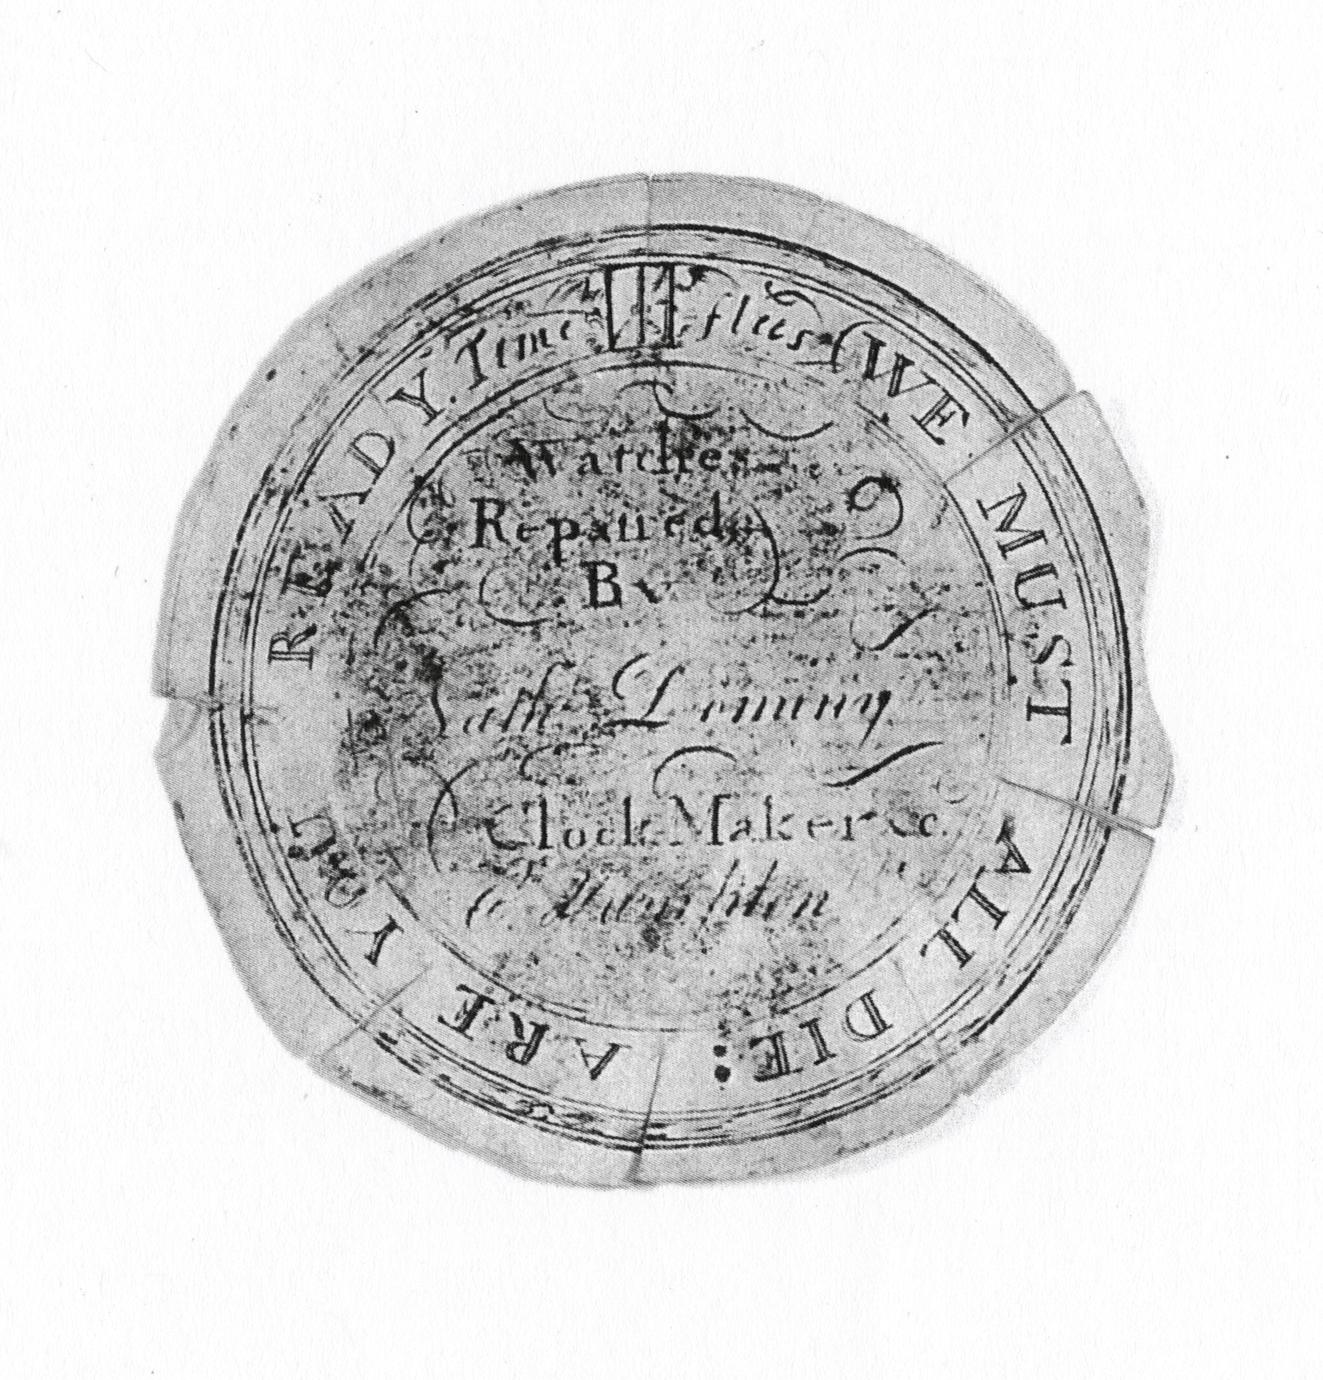 Black and white photograph of the watch paper of Nathaniel Dominy IV.